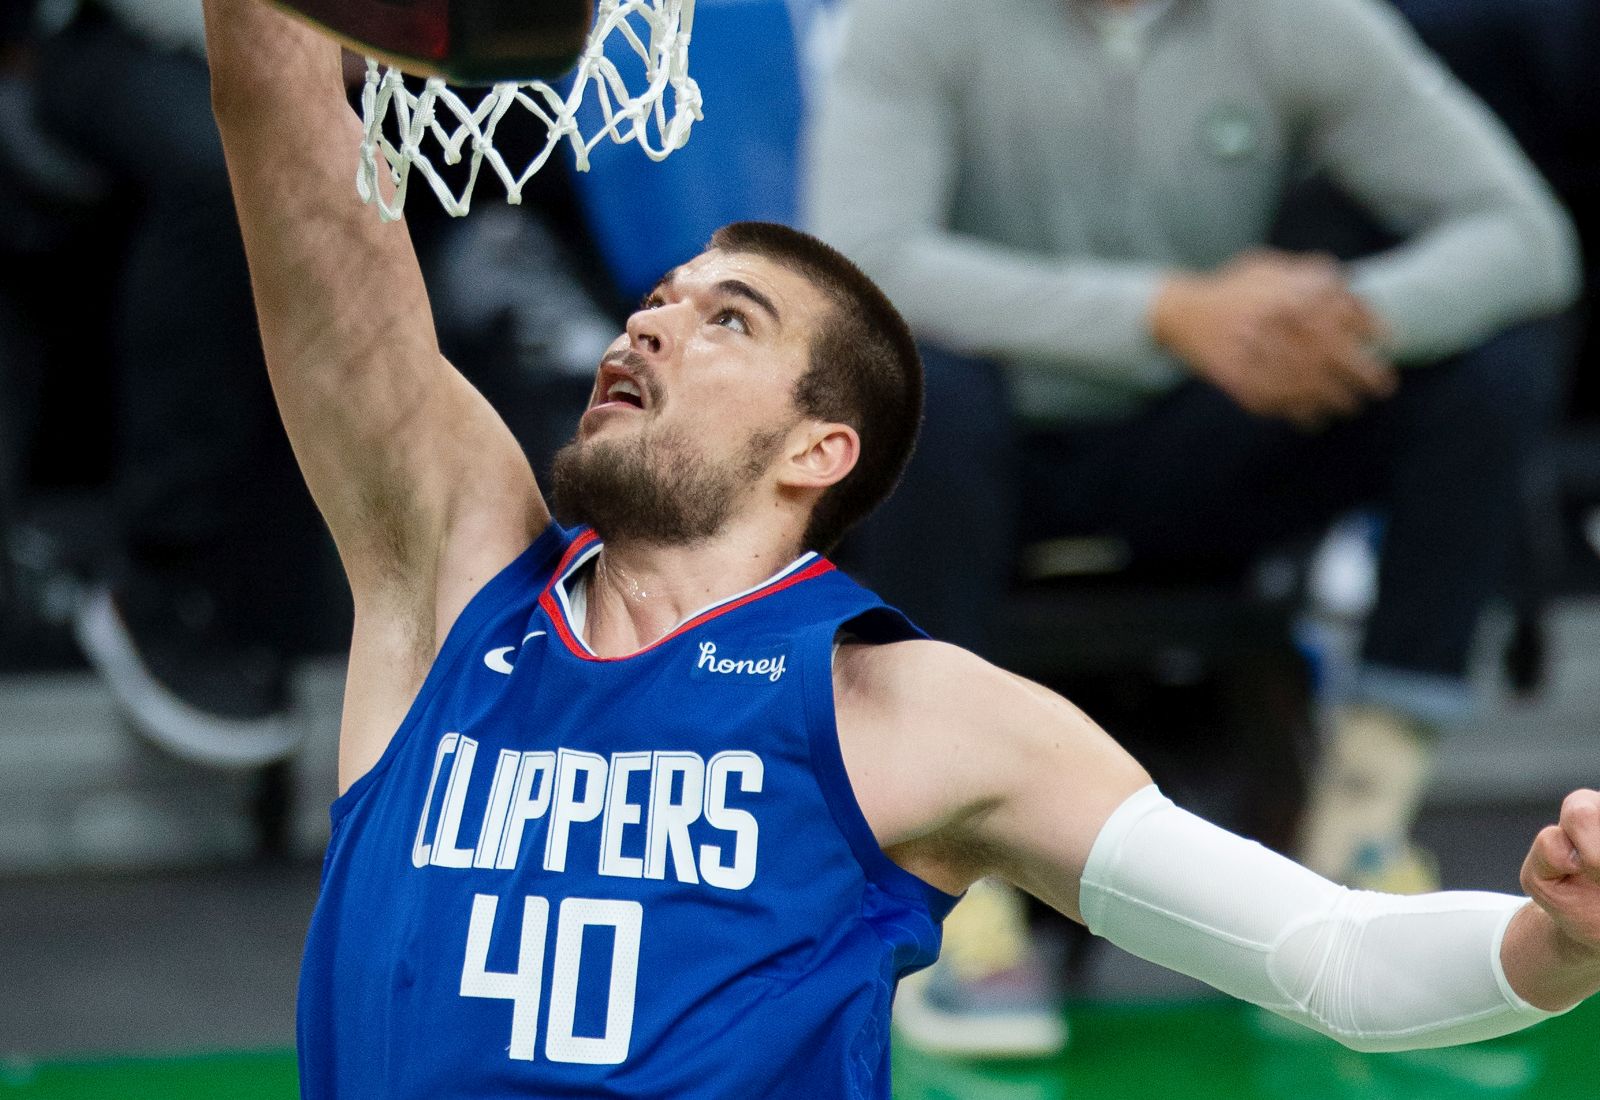 epa09047690 Los Angeles Clippers center Ivica Zubac tips the ball in during the fourth quarter of the NBA basketball game between the Los Angeles Clippers aand Boston Celtics at the TD Garden in Boston, Massachusetts, USA, 02 March 2021.  EPA/CJ GUNTHER SHUTTERSTOCK OUT